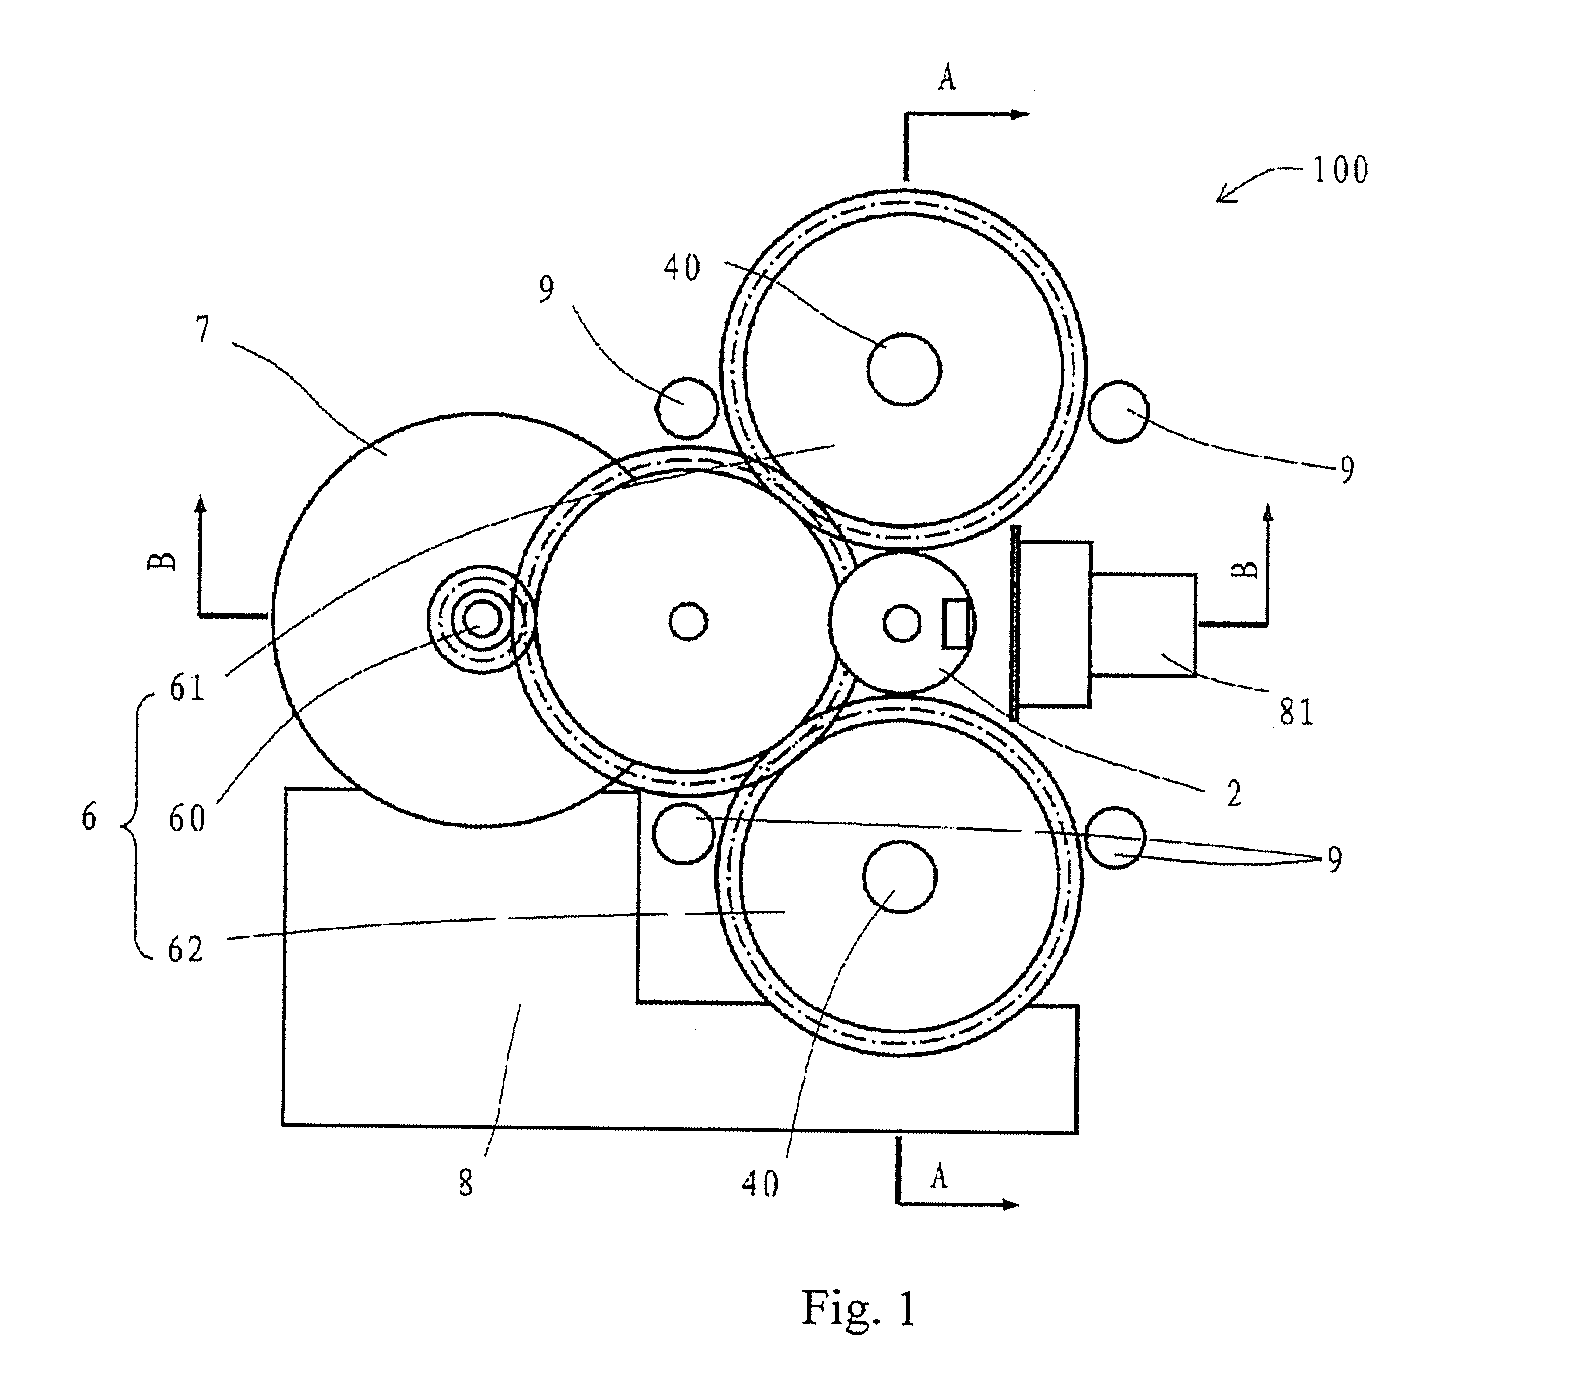 Power Assist Device and Brake System